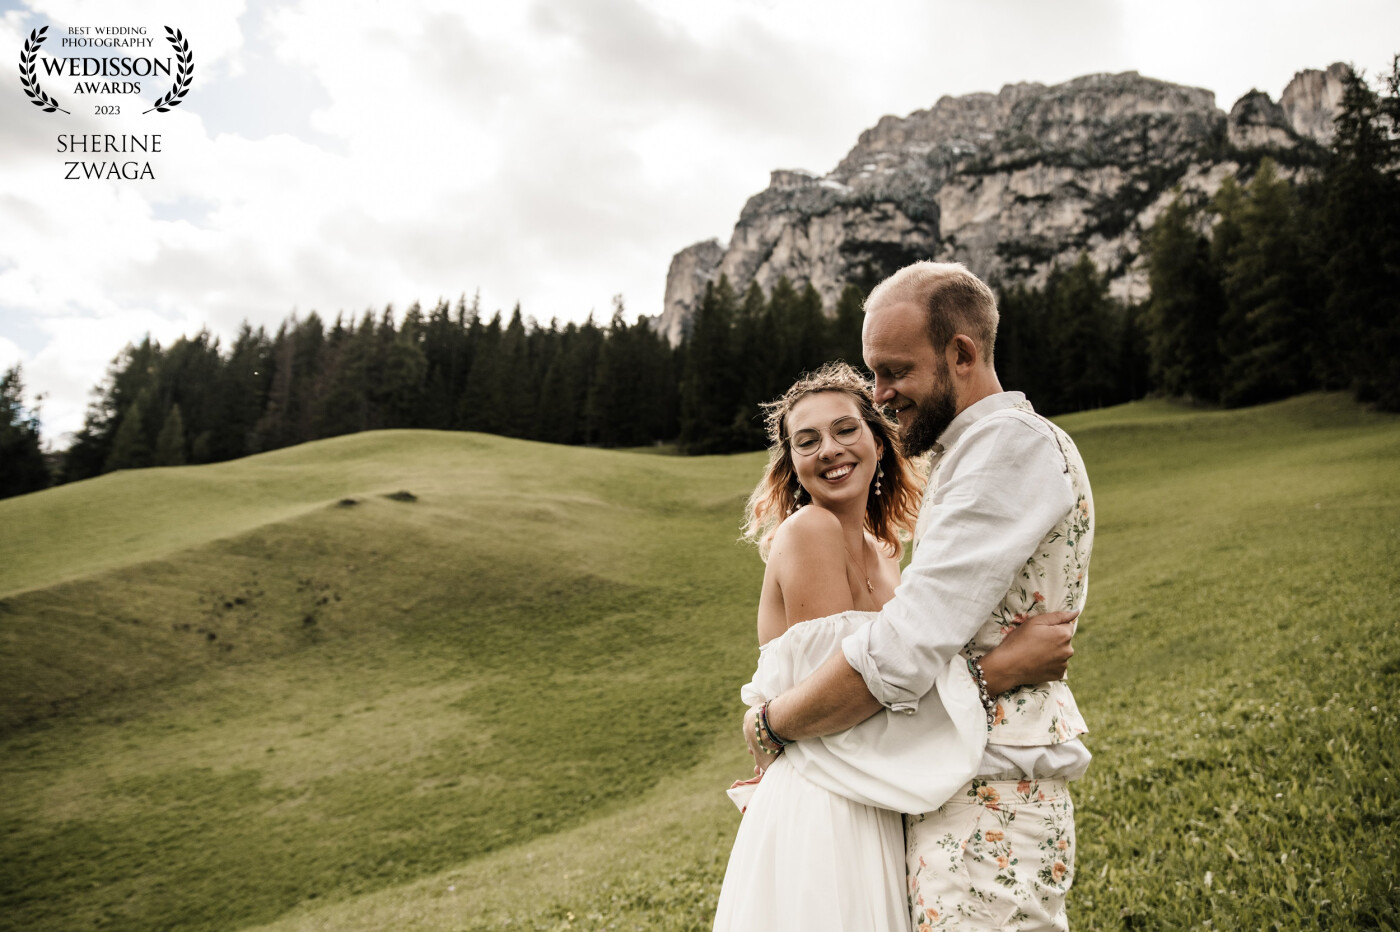 This intimate wedding in The Dolomites showed me the most important thing about marriage: the connection between two people. I could feel the love of this lovely couple through every photo. Their love for each other, for their loved ones and for nature.